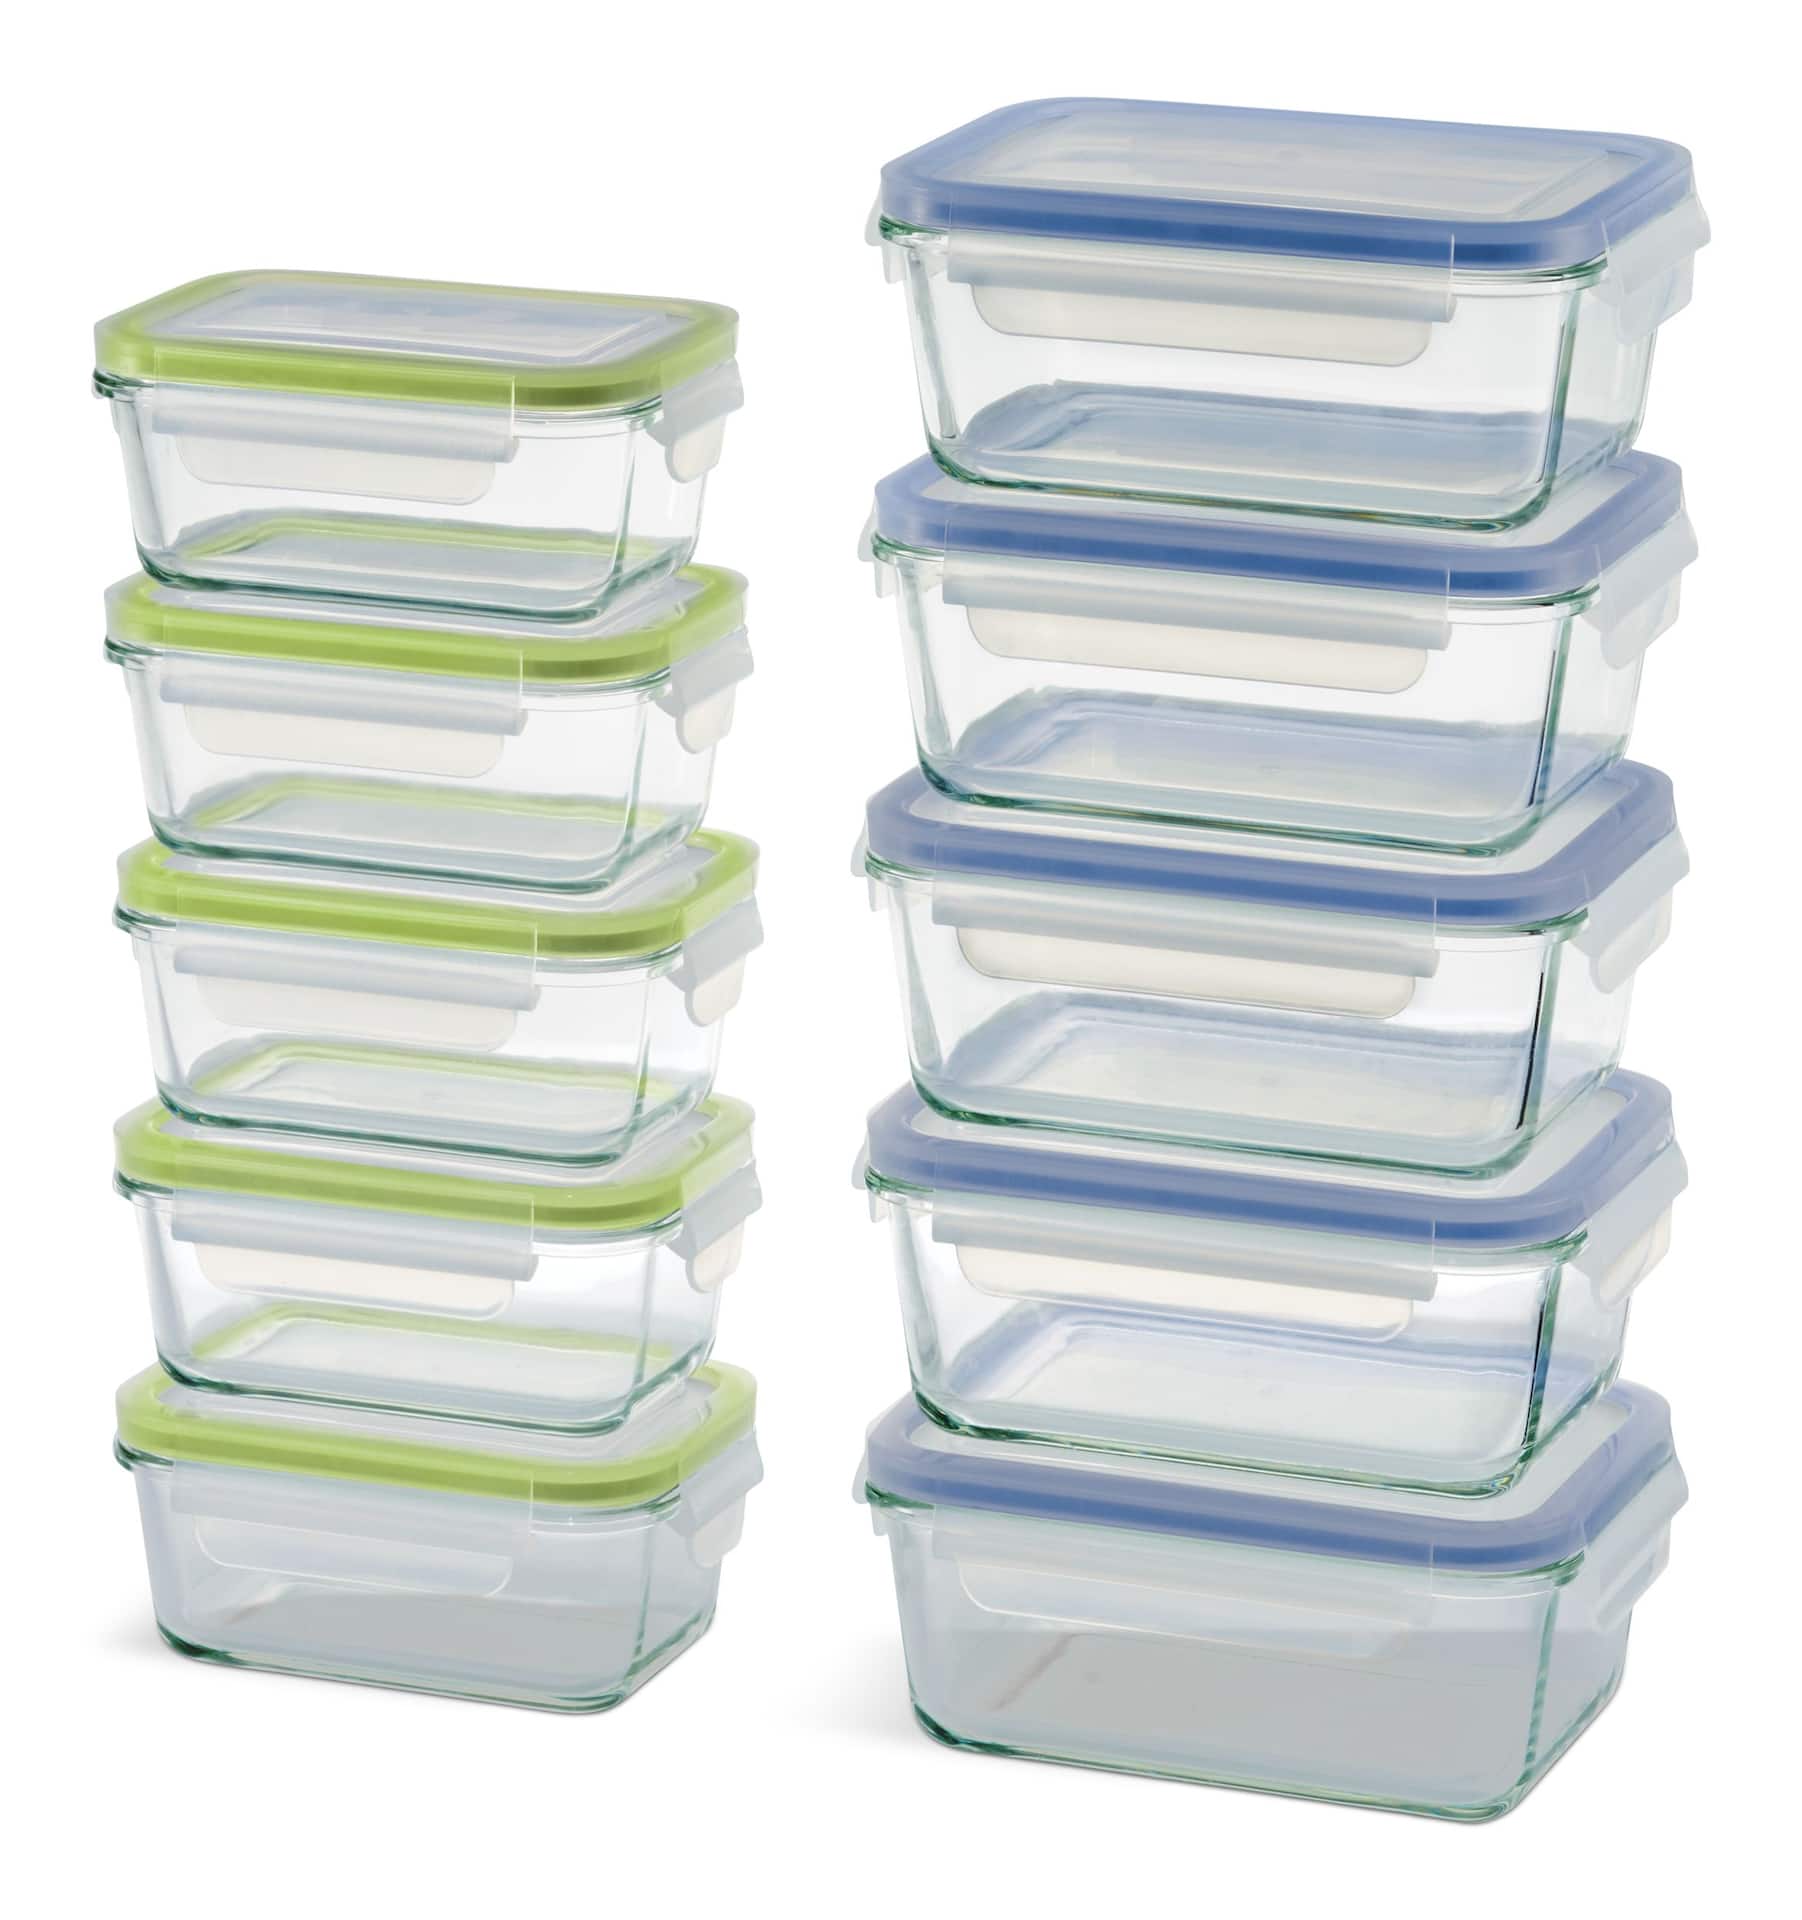 Performance 2-Piece Glass Vented Food Storage Containers, 34-Ounce Set